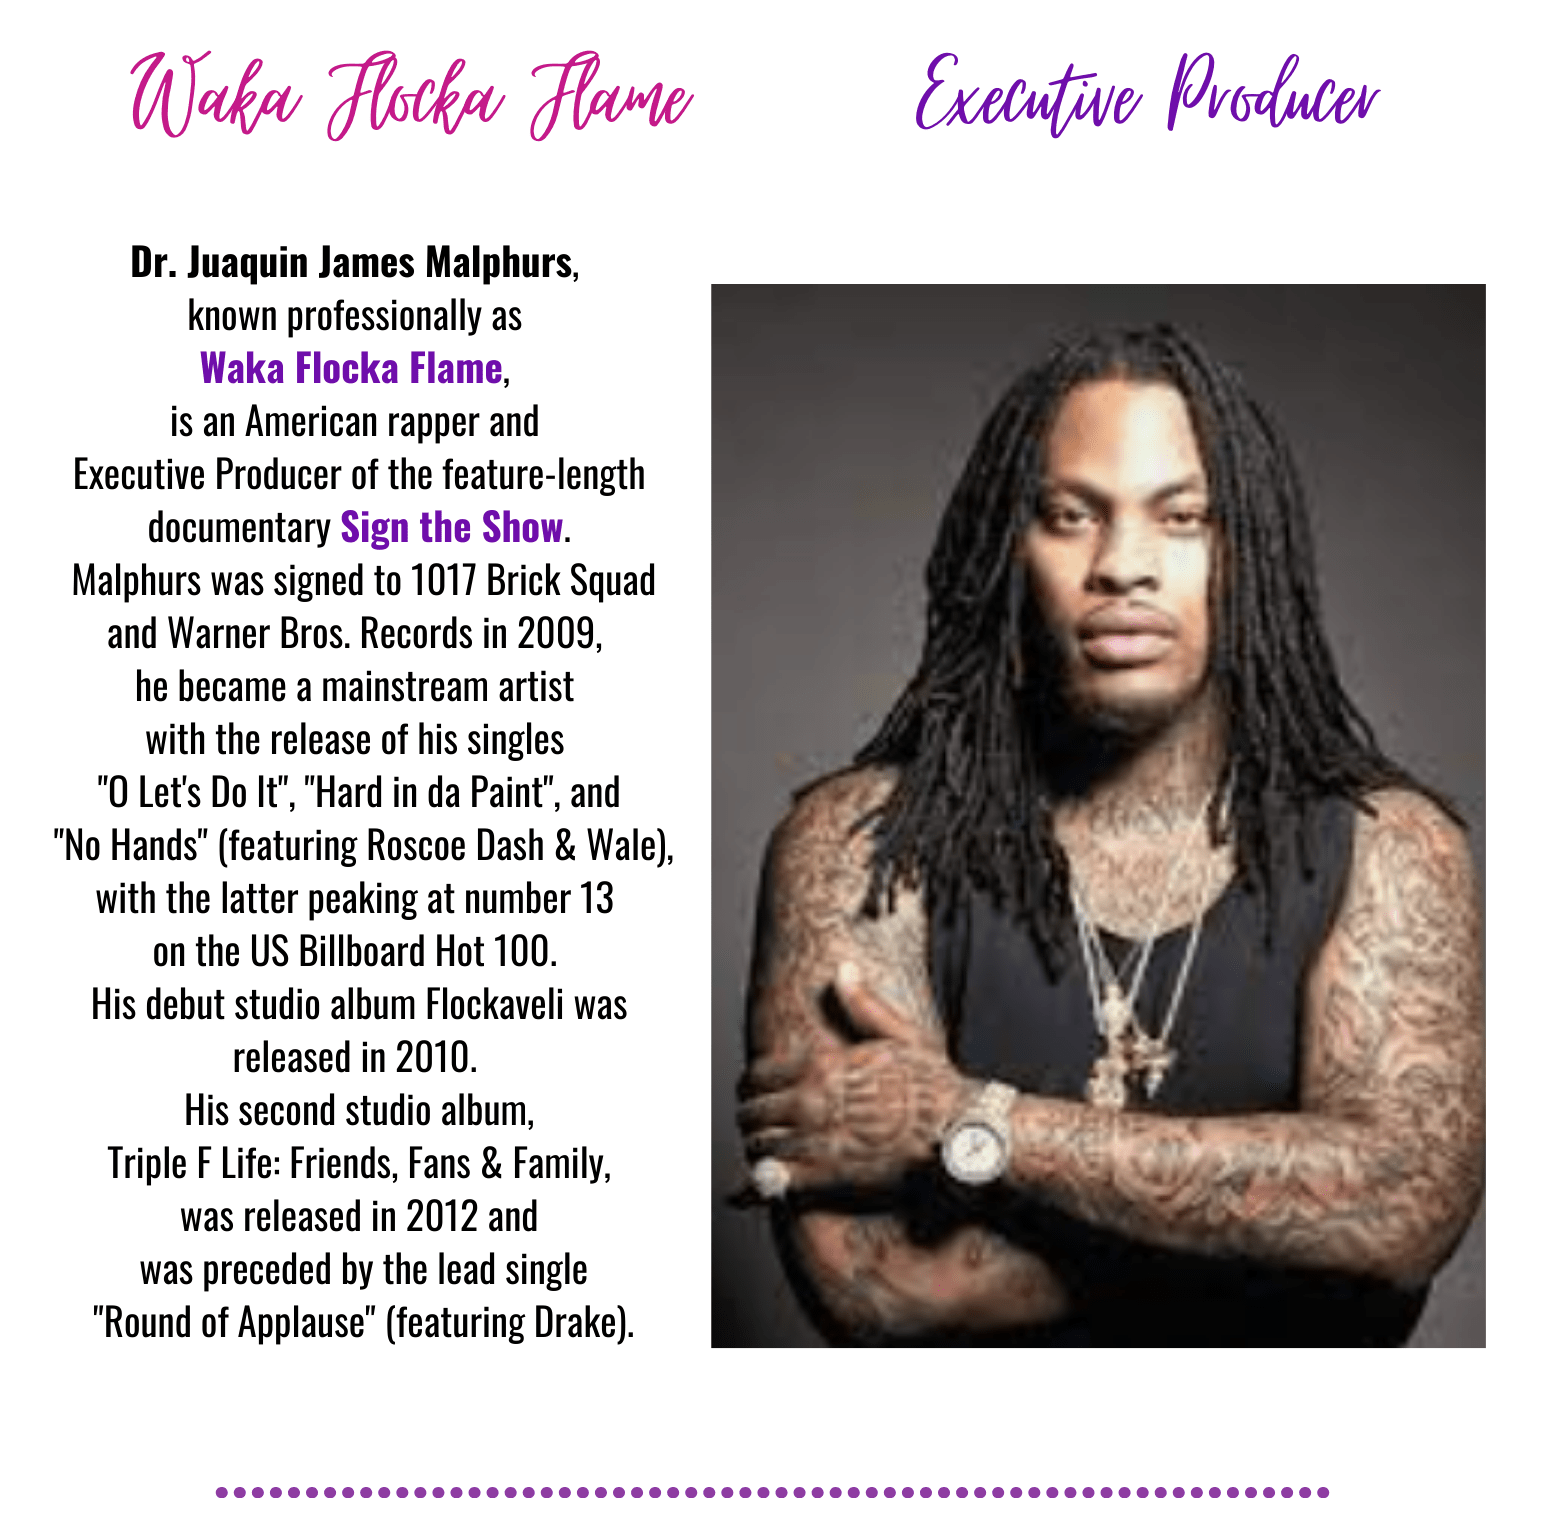 Wake Flocka Flame
Executive Producer
Dr. Juaquin James Malphurs,
known professionally as
Waka Flocka Flame,
is an American rapper and
Executive Producer of the feature-length
documentary Sign the Show.
Malphurs was signed to 1017 Brick Squad
and Warner Bros. Records in 2009,
he became a mainstream artist
with the release of his singles
O Let's Do It, Hard in da Paint, and
No Hands (featuring Roscoe Dash & Wale),
with the latter peaking at number 13
on the US Billboard Hot 100.
His debut studio album Flockaveli was
released in 2010.
His second studio album,
Triple F Life: Friends, Fans & Family,
was released in 2012 and
was preceded by the lead single
Round of Applause (featuring Drake).